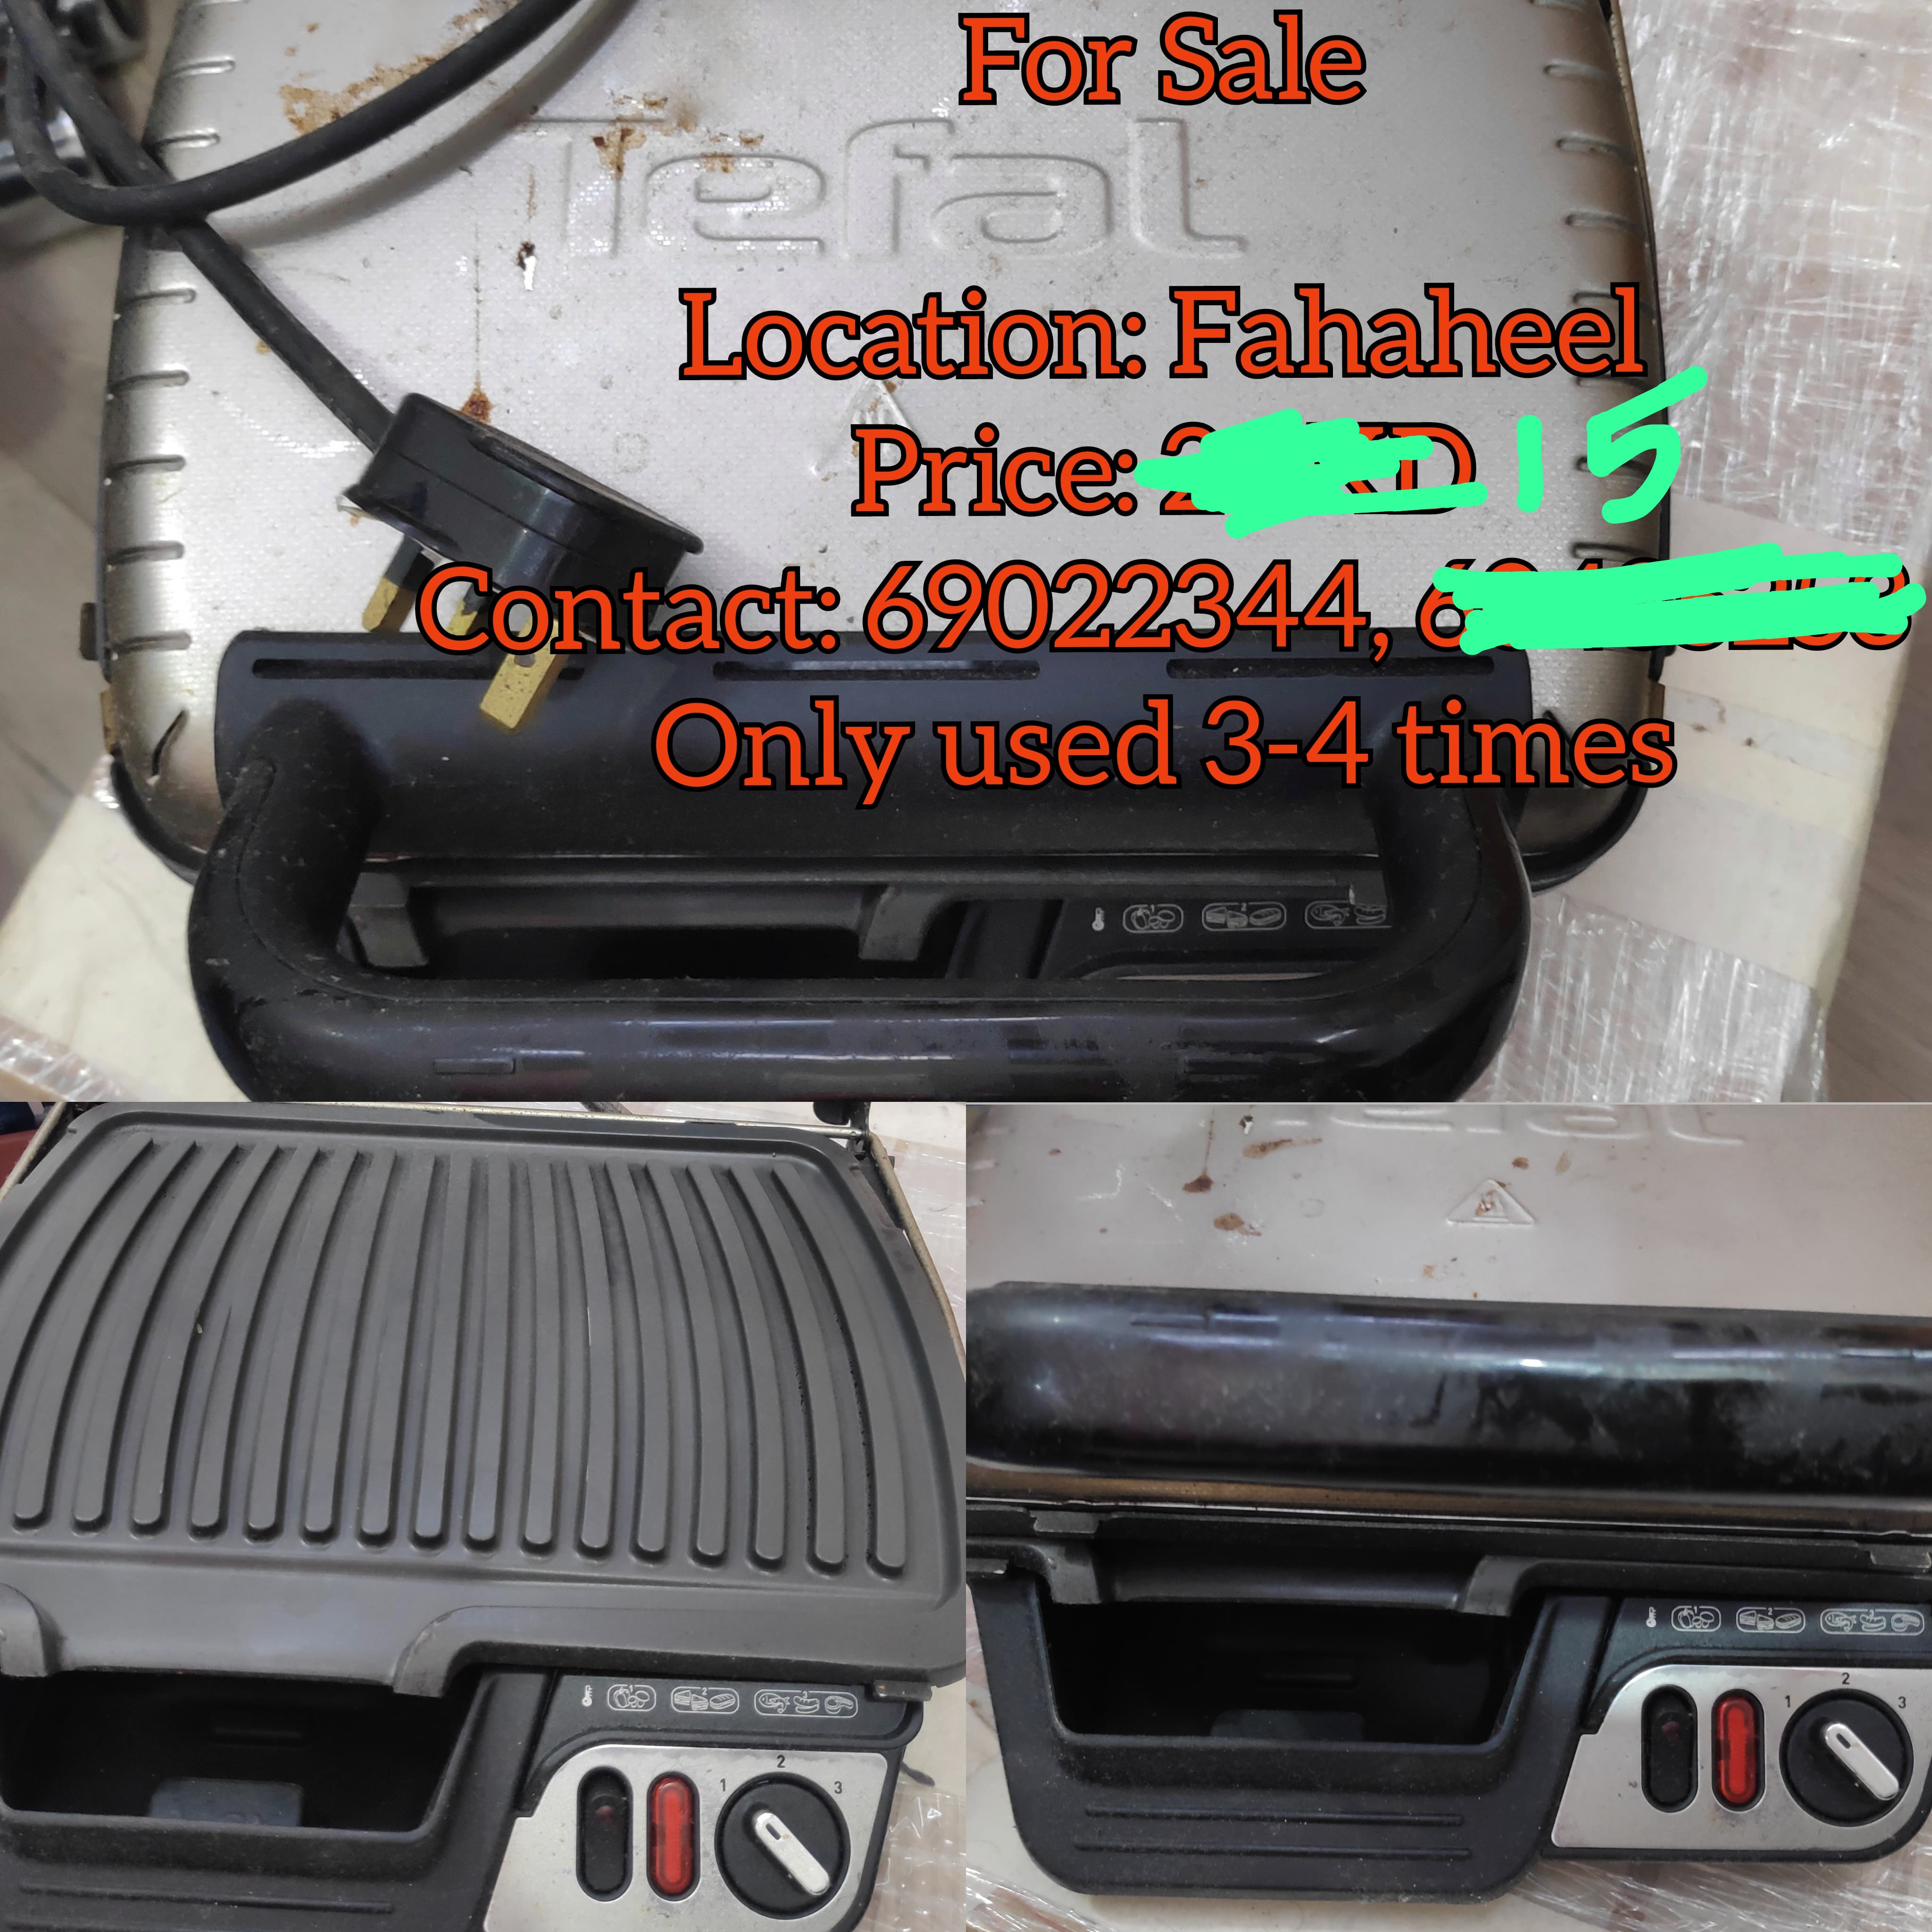 Shawarma Toaster & Grill  For Sale